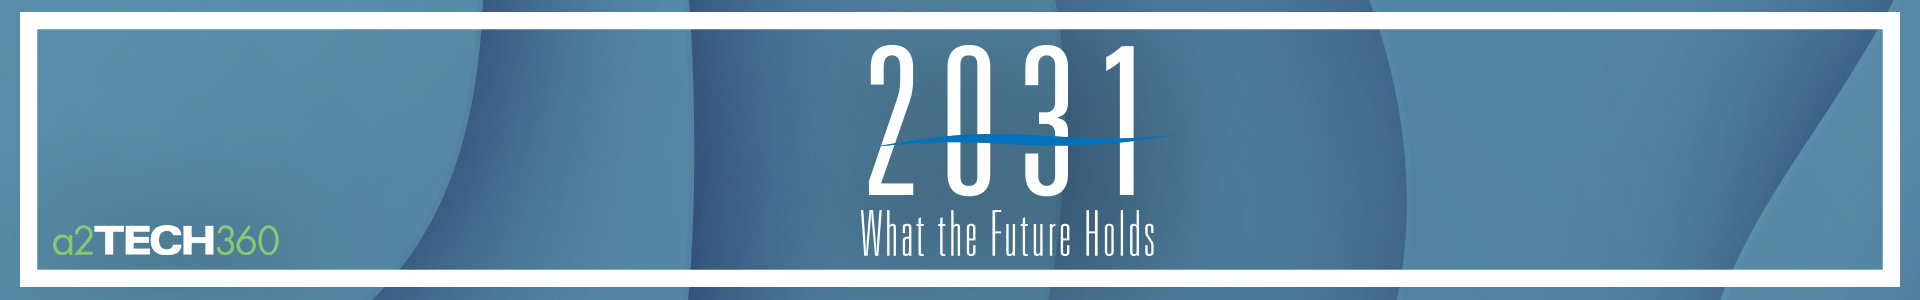 2031: What the Future Holds – October 6, 2021